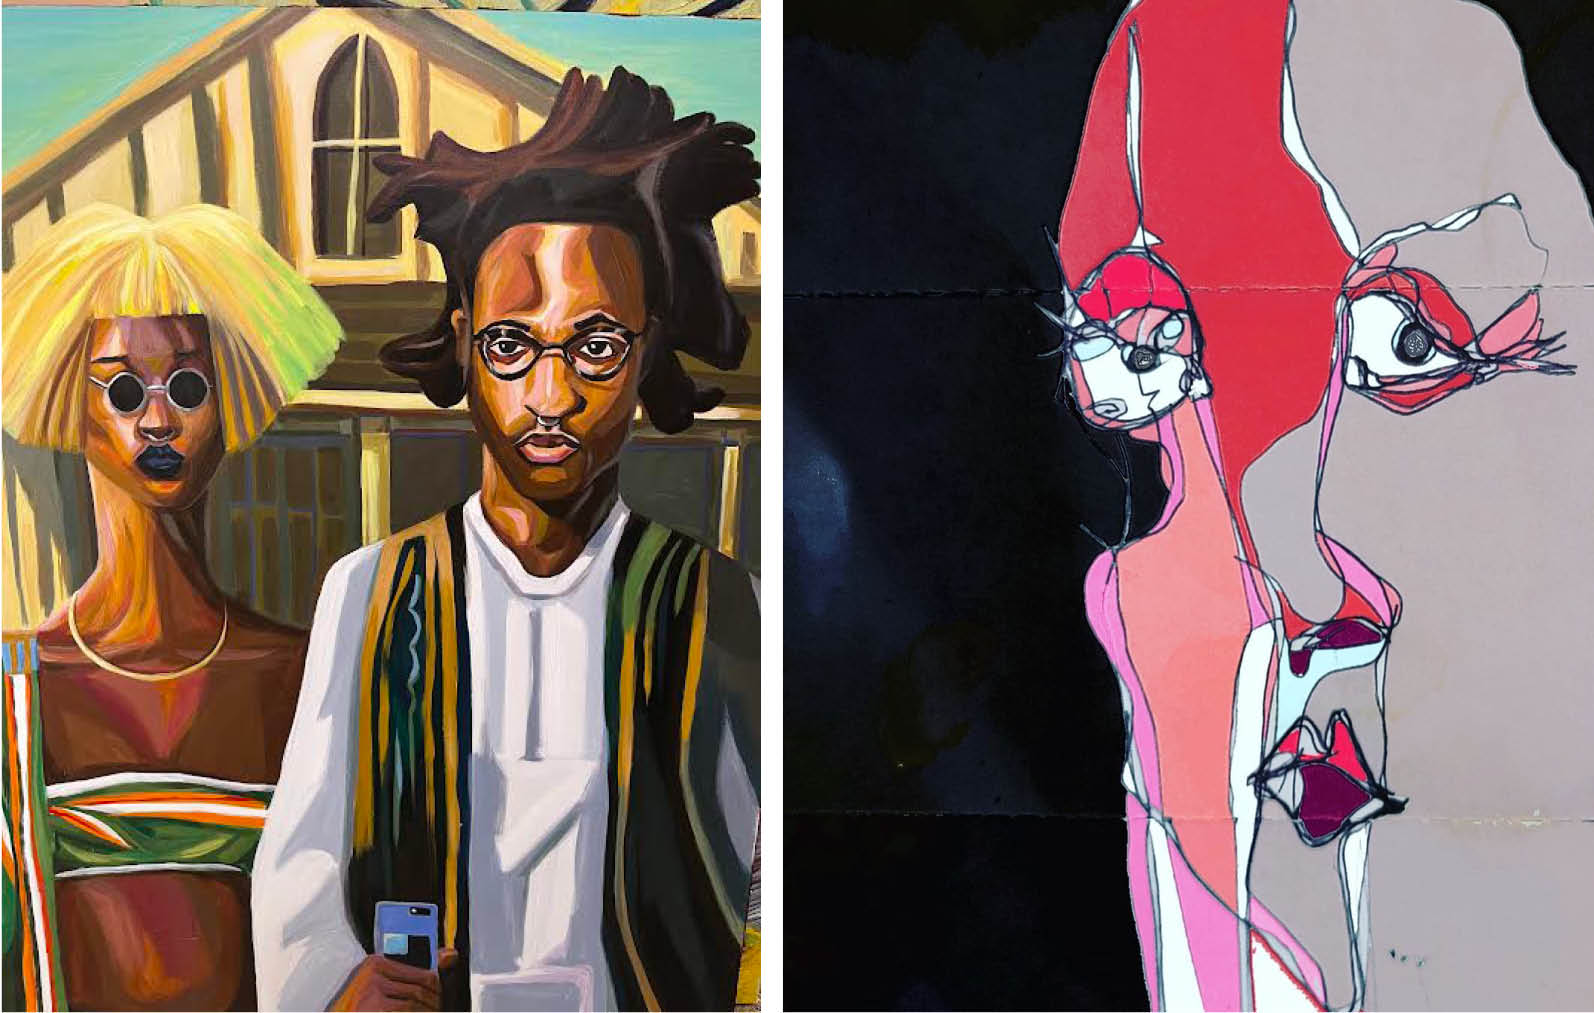 Exhibition header featuring homage to "American Gothic" featuring black figures by Sam Onche, and an abstracted pink and brown bust painting by Sholo Beverly